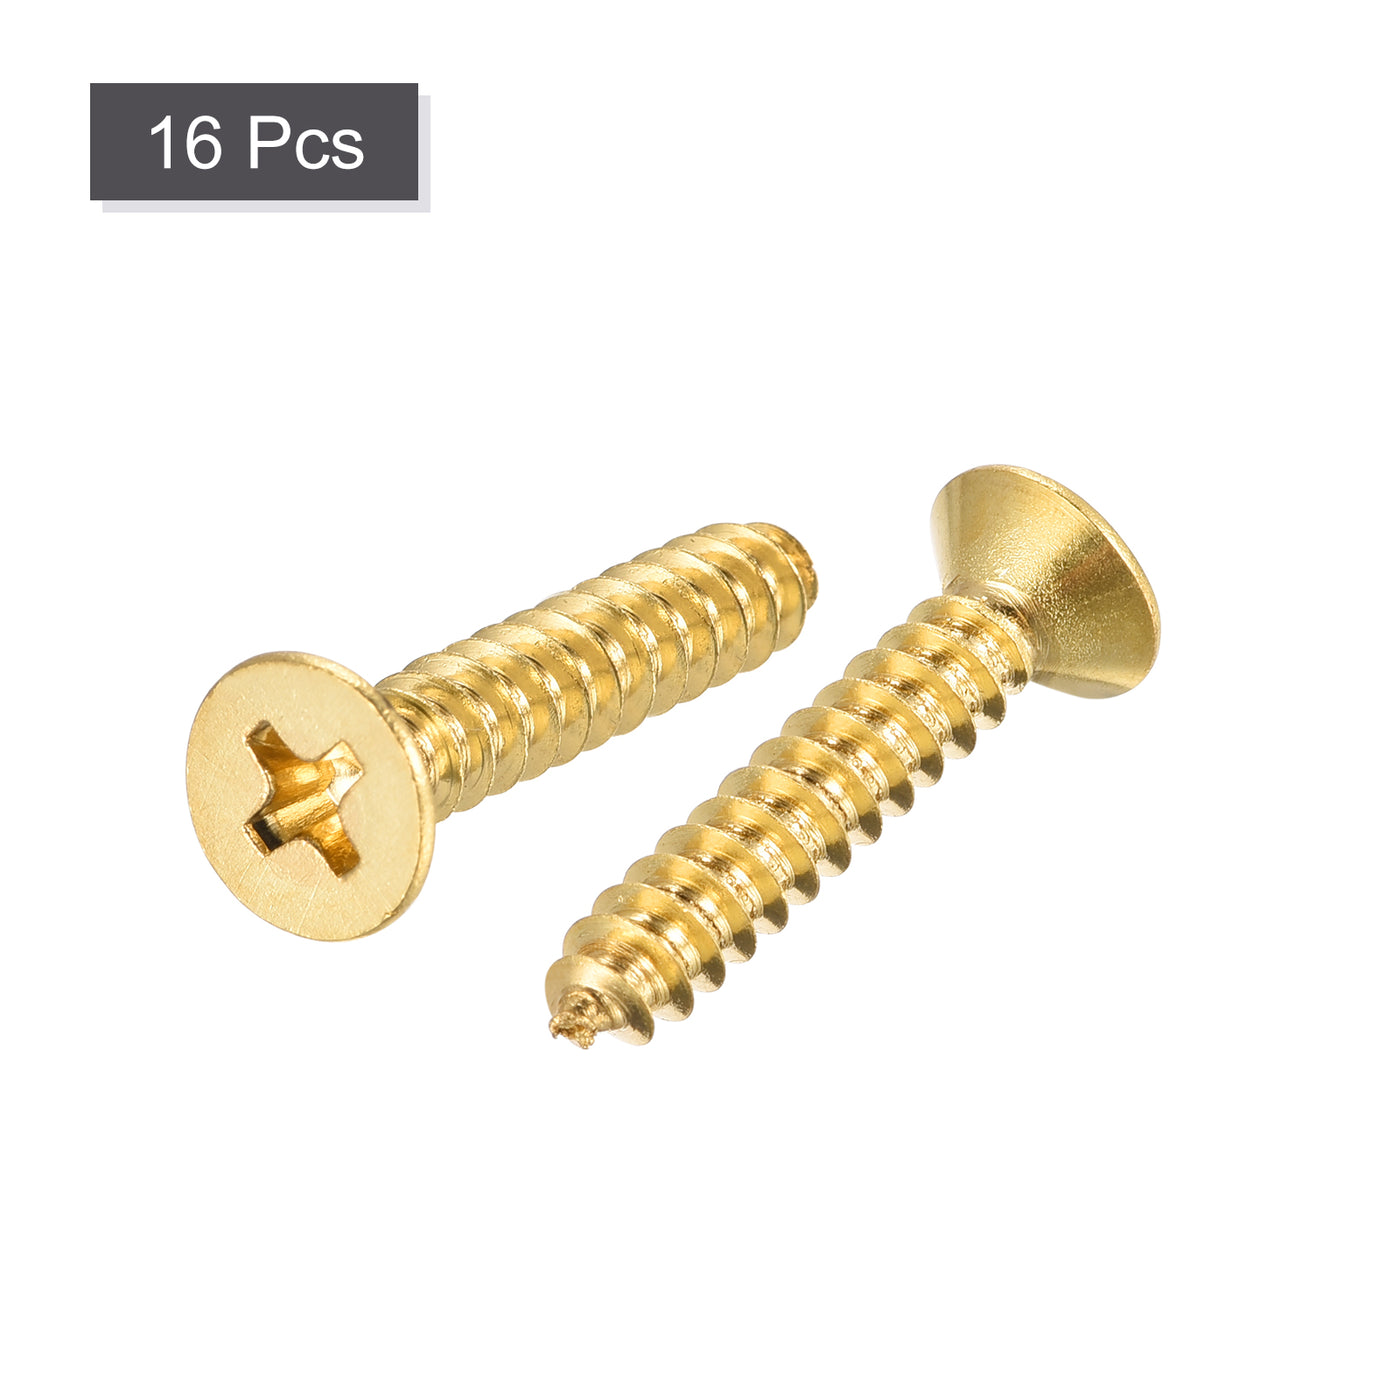 uxcell Uxcell Brass Wood Screws, M5x25mm Phillips Flat Head Self Tapping Connector for Door Hinges, Wooden Furniture, Home Appliances 16Pcs